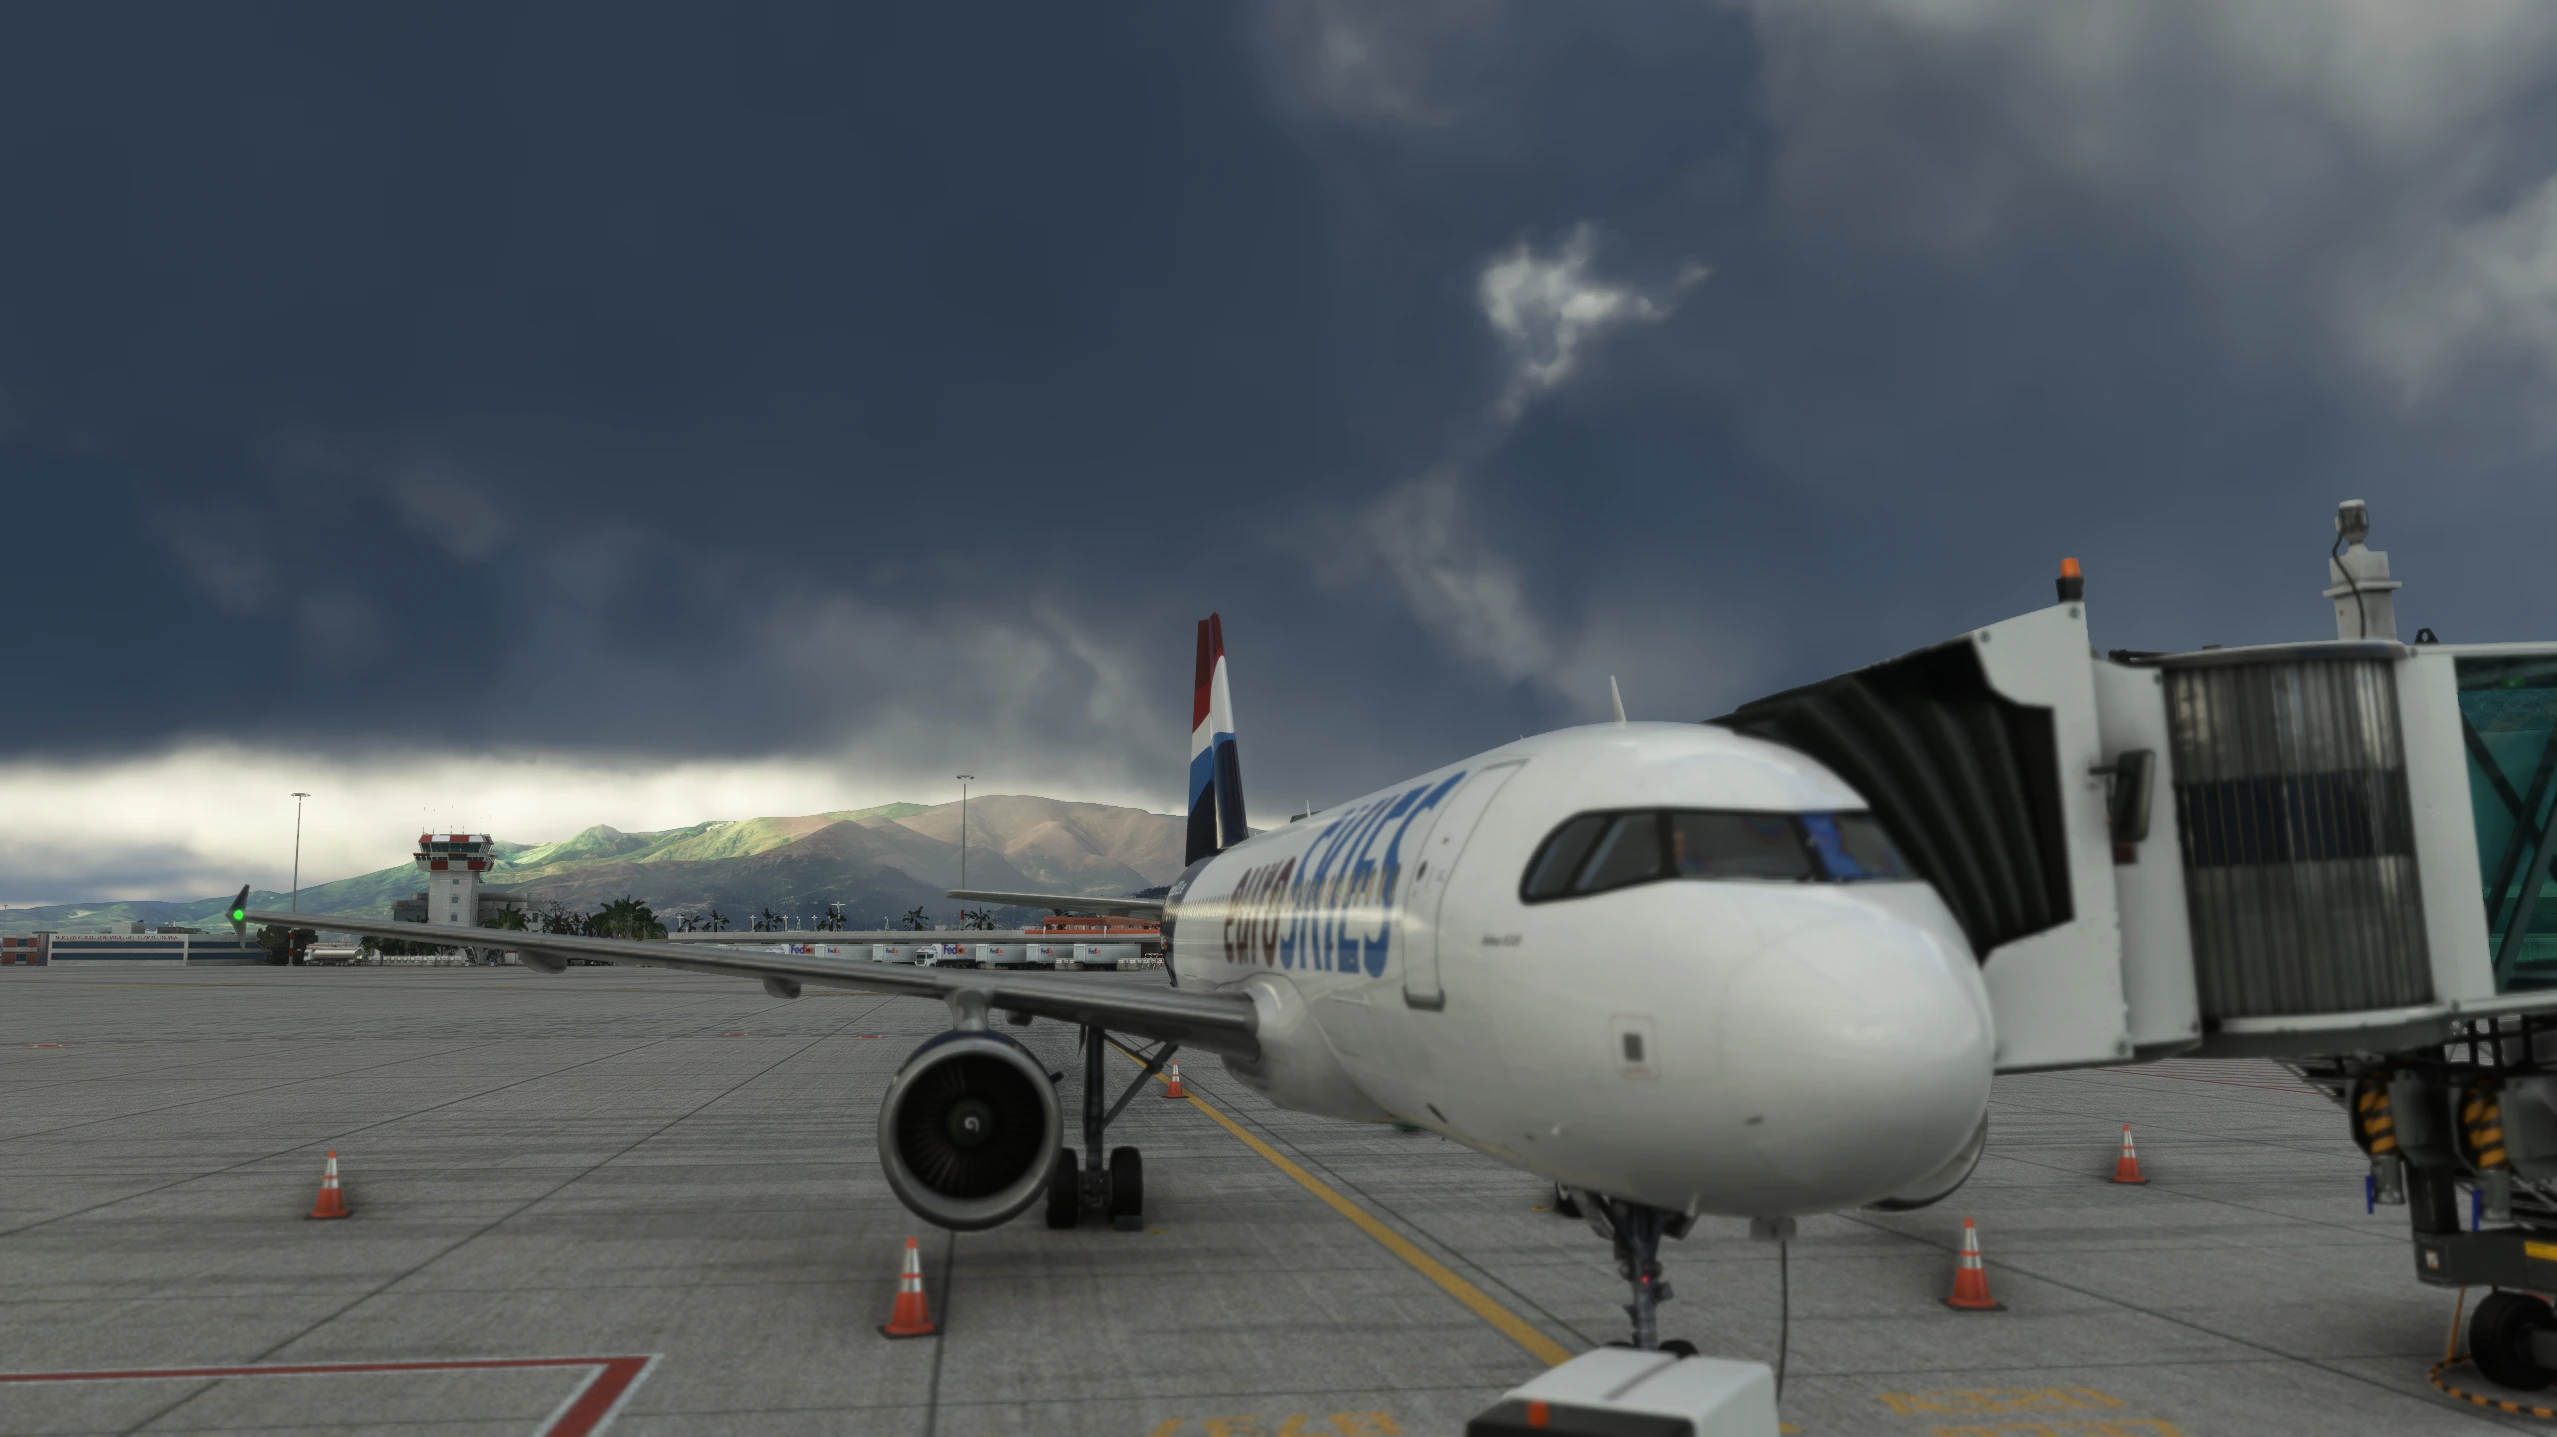 euroSKIS A320 experience parking in stormy weather